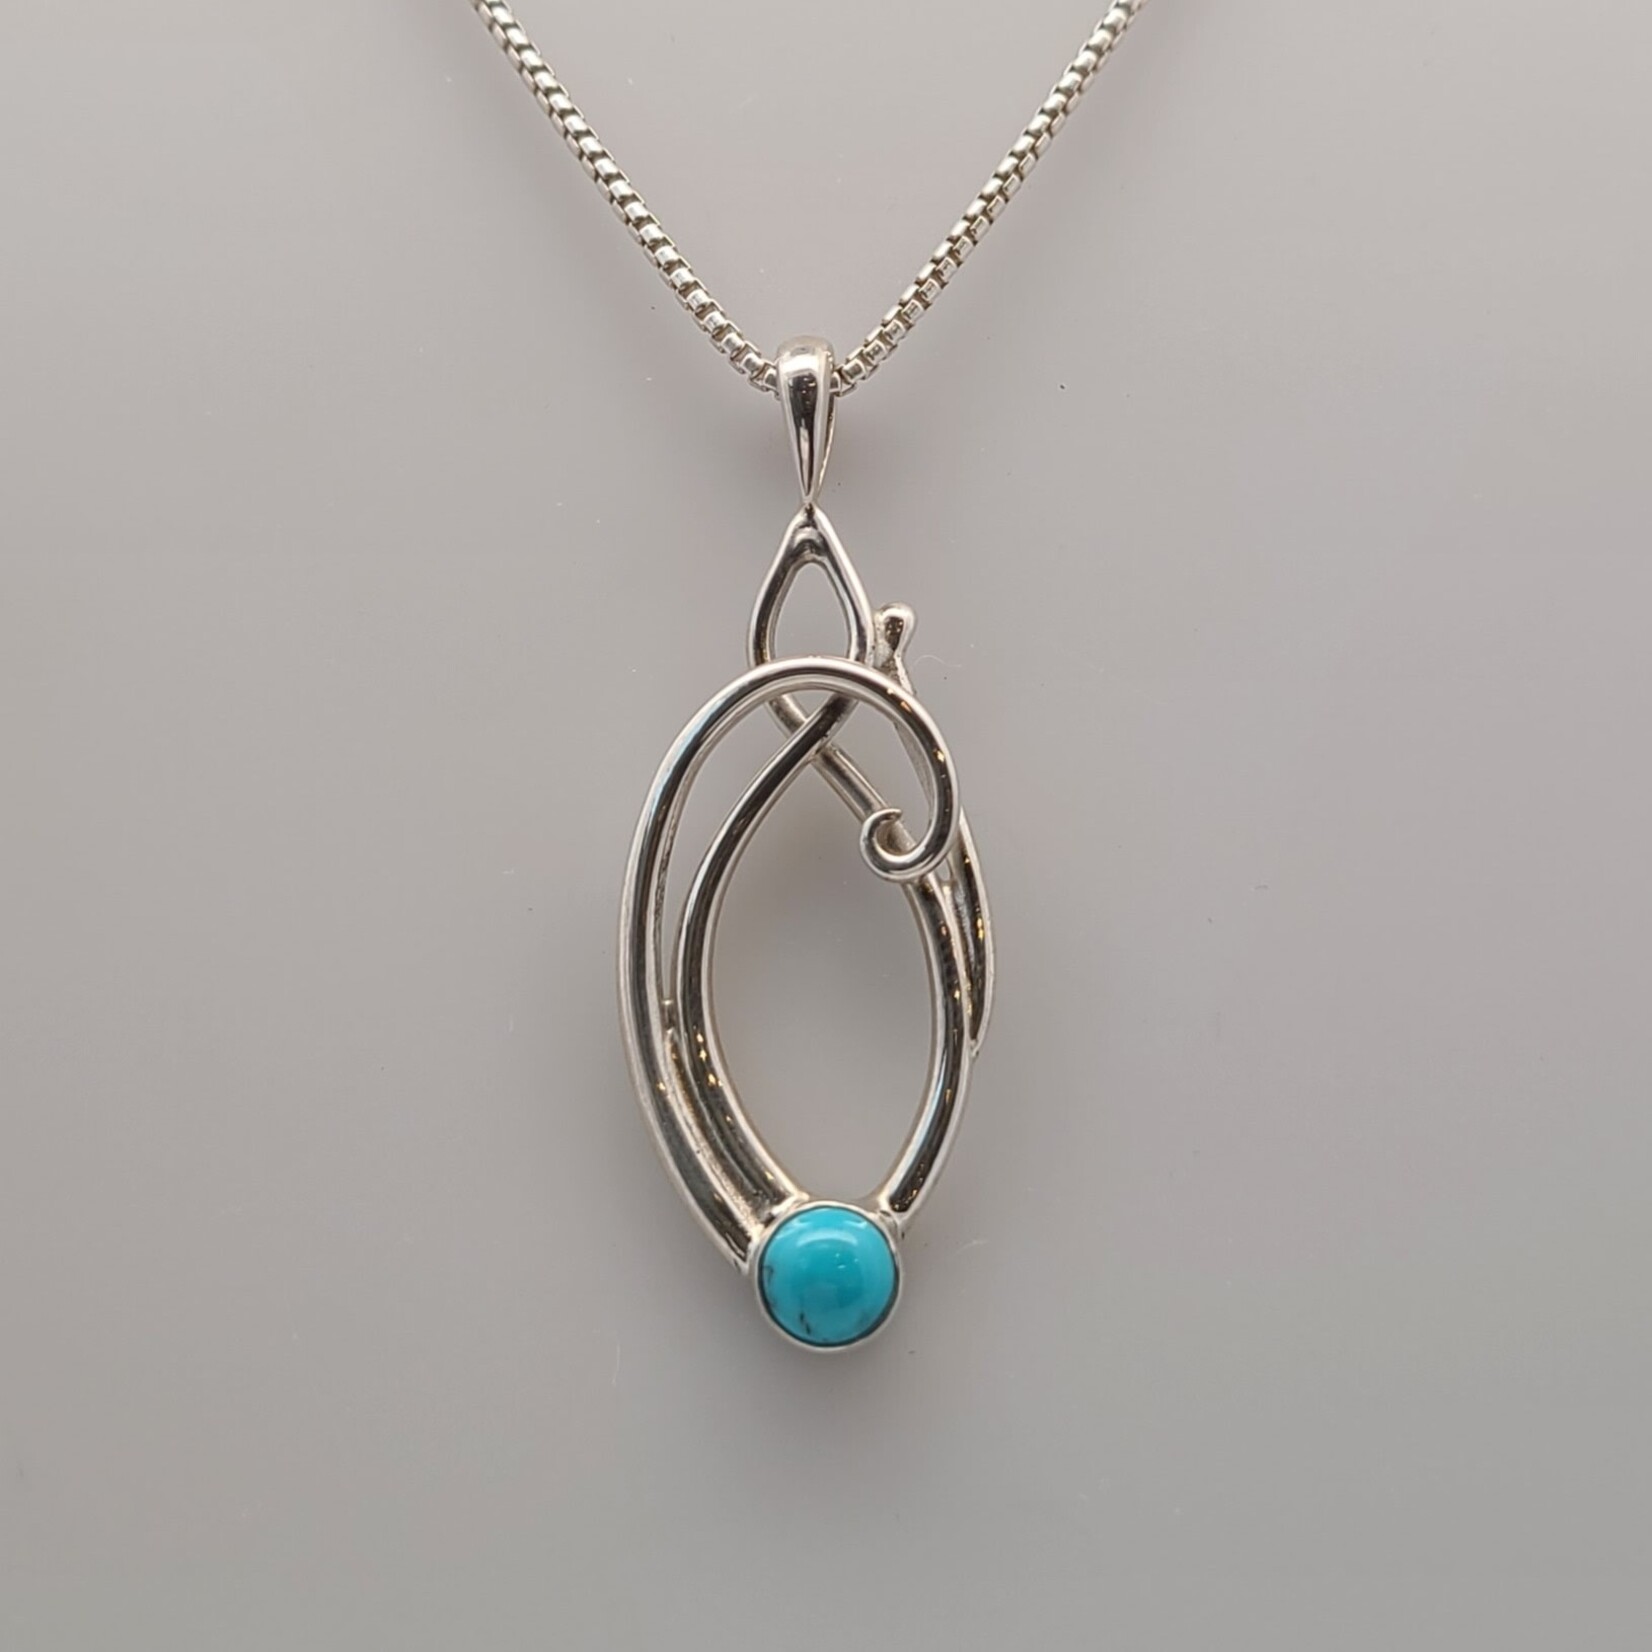 Modern Heirloom® Small Lorien Turquoise Necklace, 20" 1.1